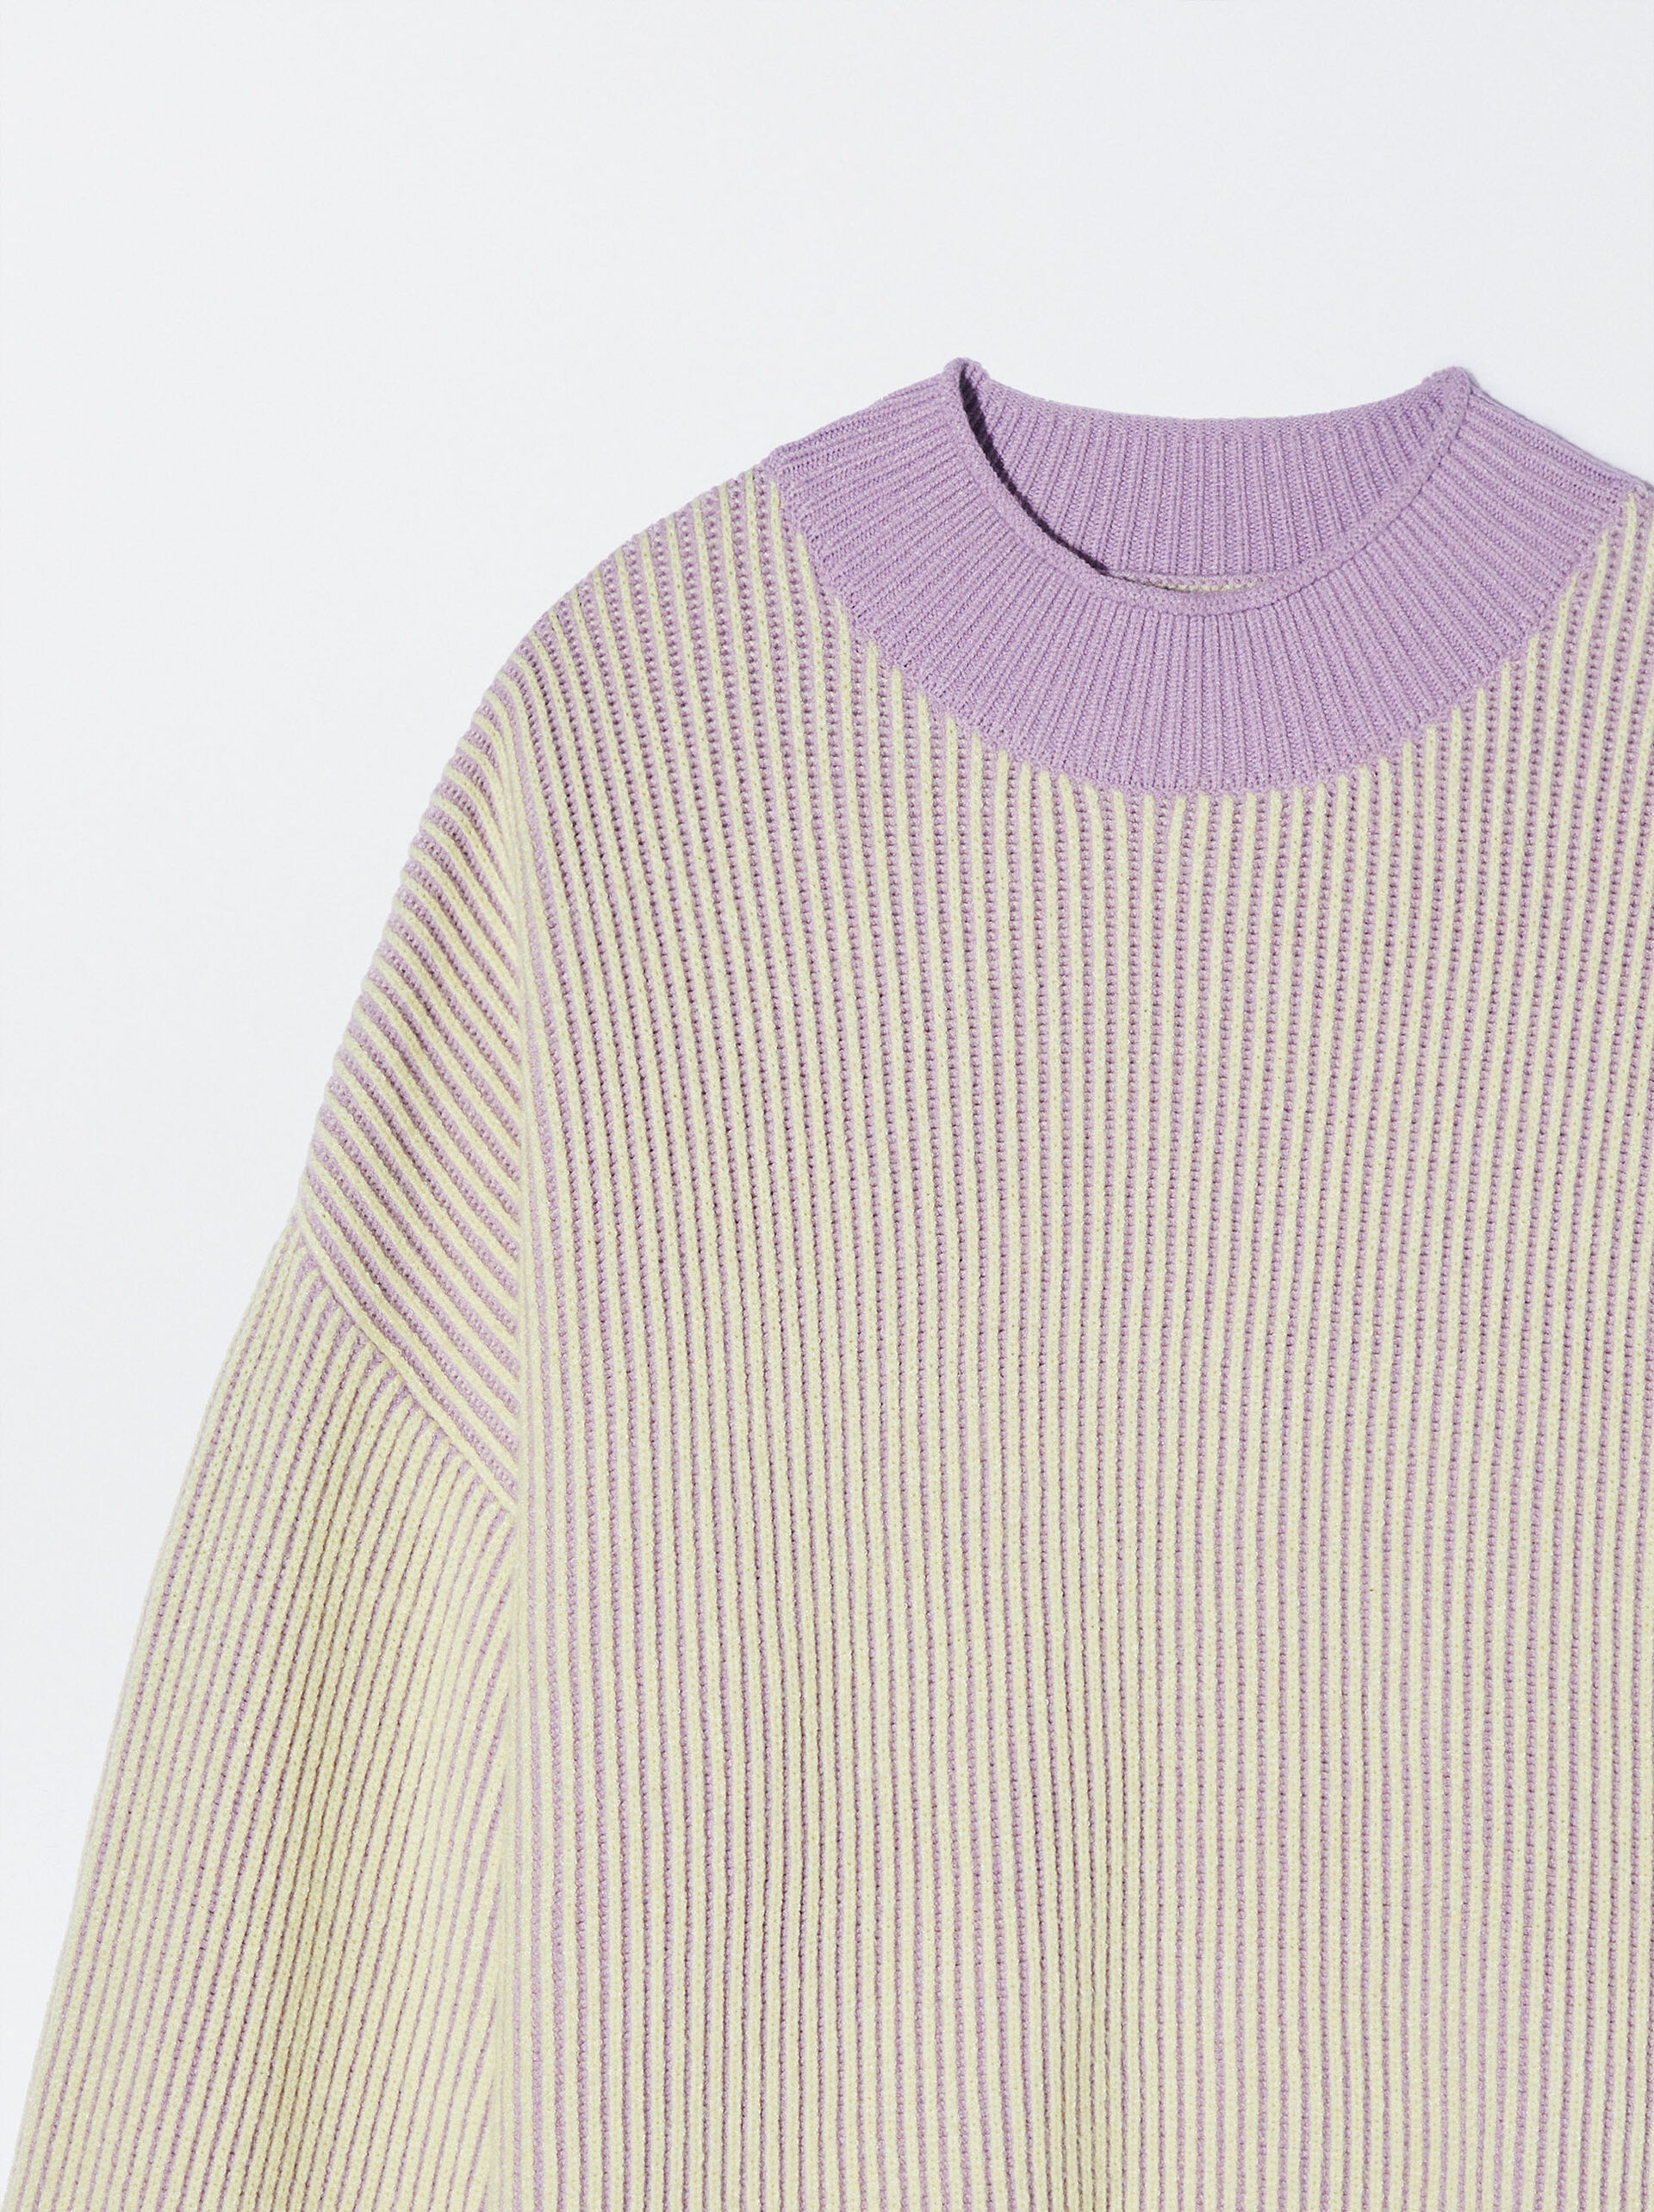 Rib Knit Sweater image number 5.0